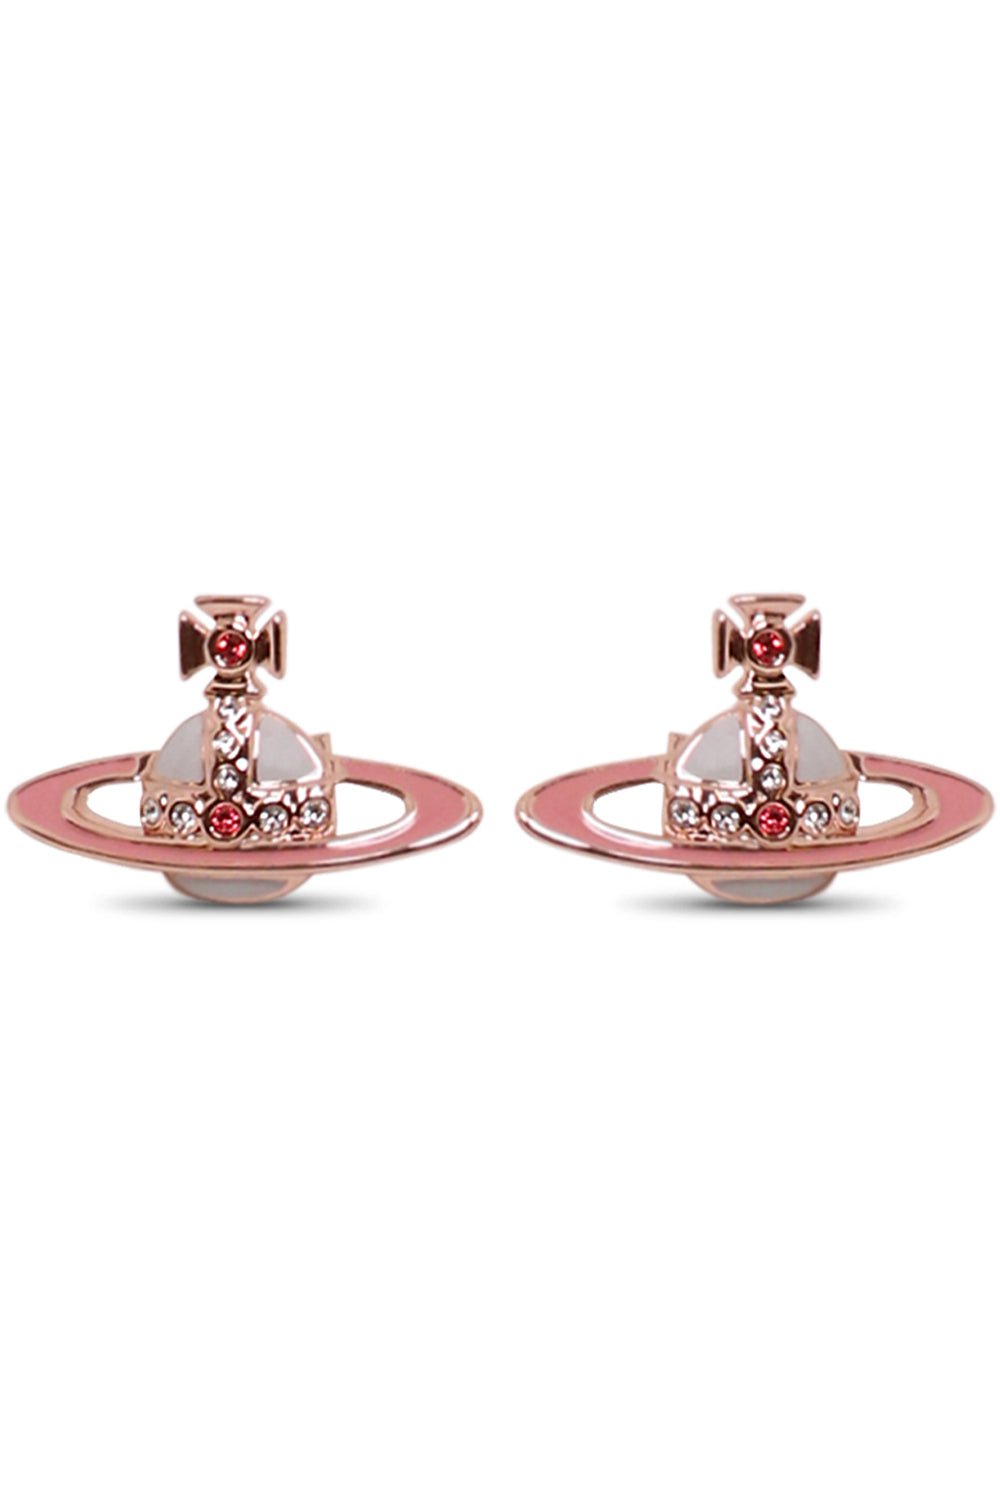 VIVIENNE WESTWOOD Accessories MULTI SMALL NEO BAS RELIEF EARRING | PINK GOLD/PINK